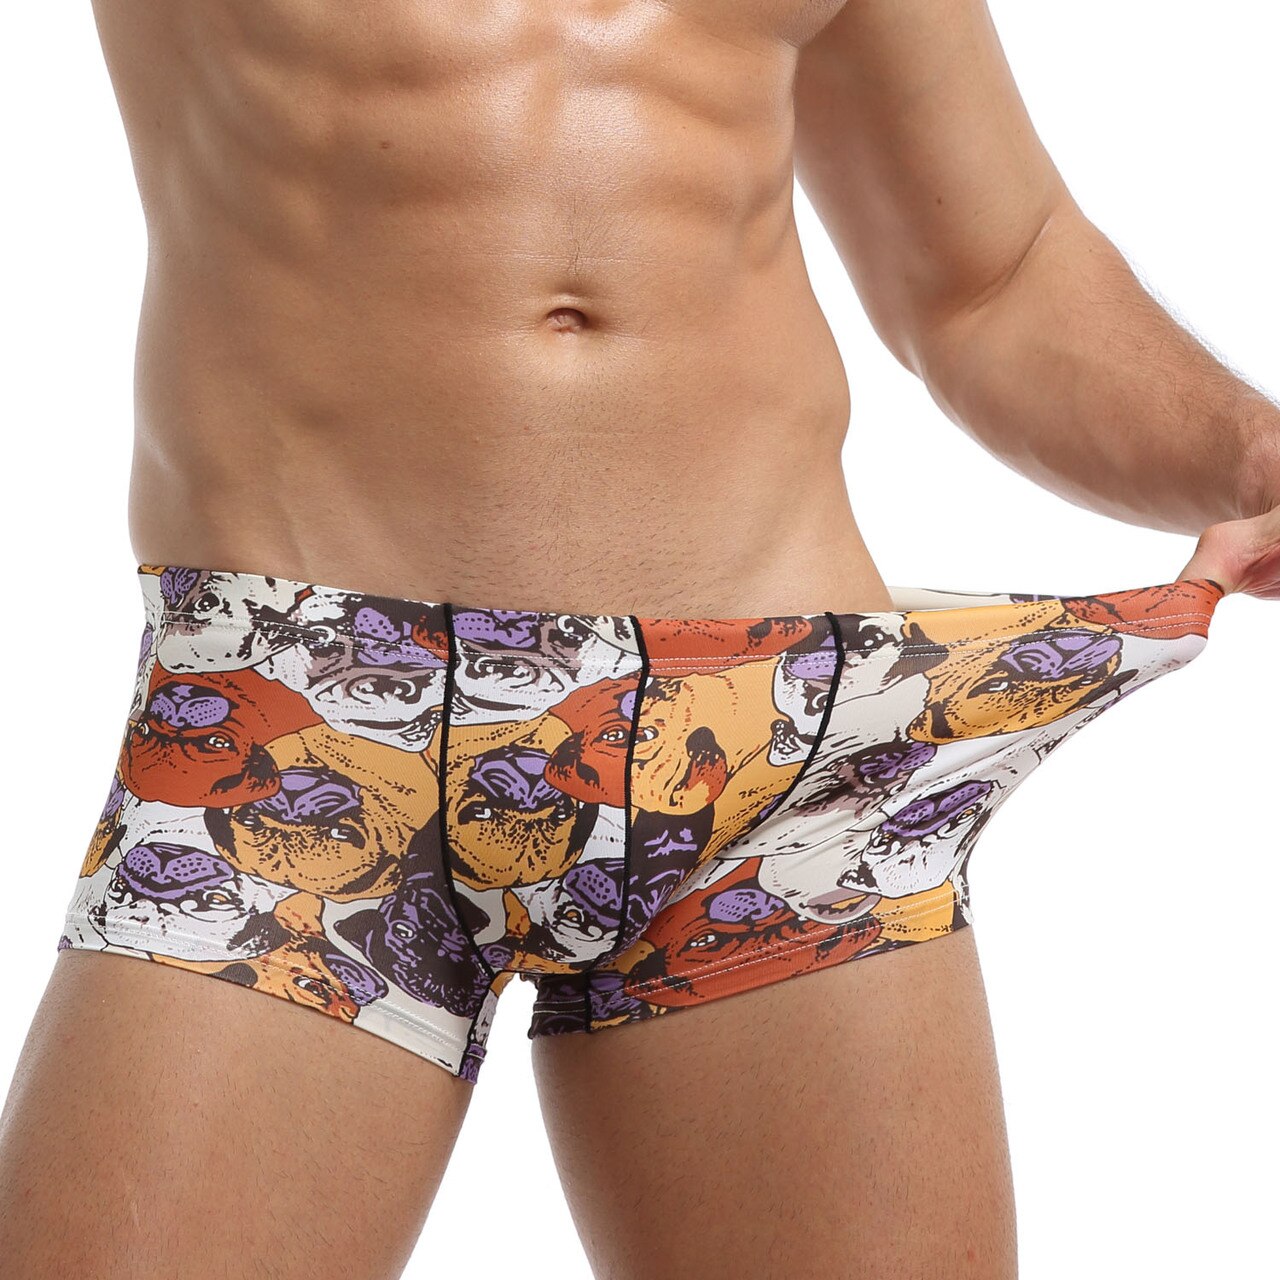 SALE - Mens Polymide Comfortable & Light Boxer Briefs Bull Dogs